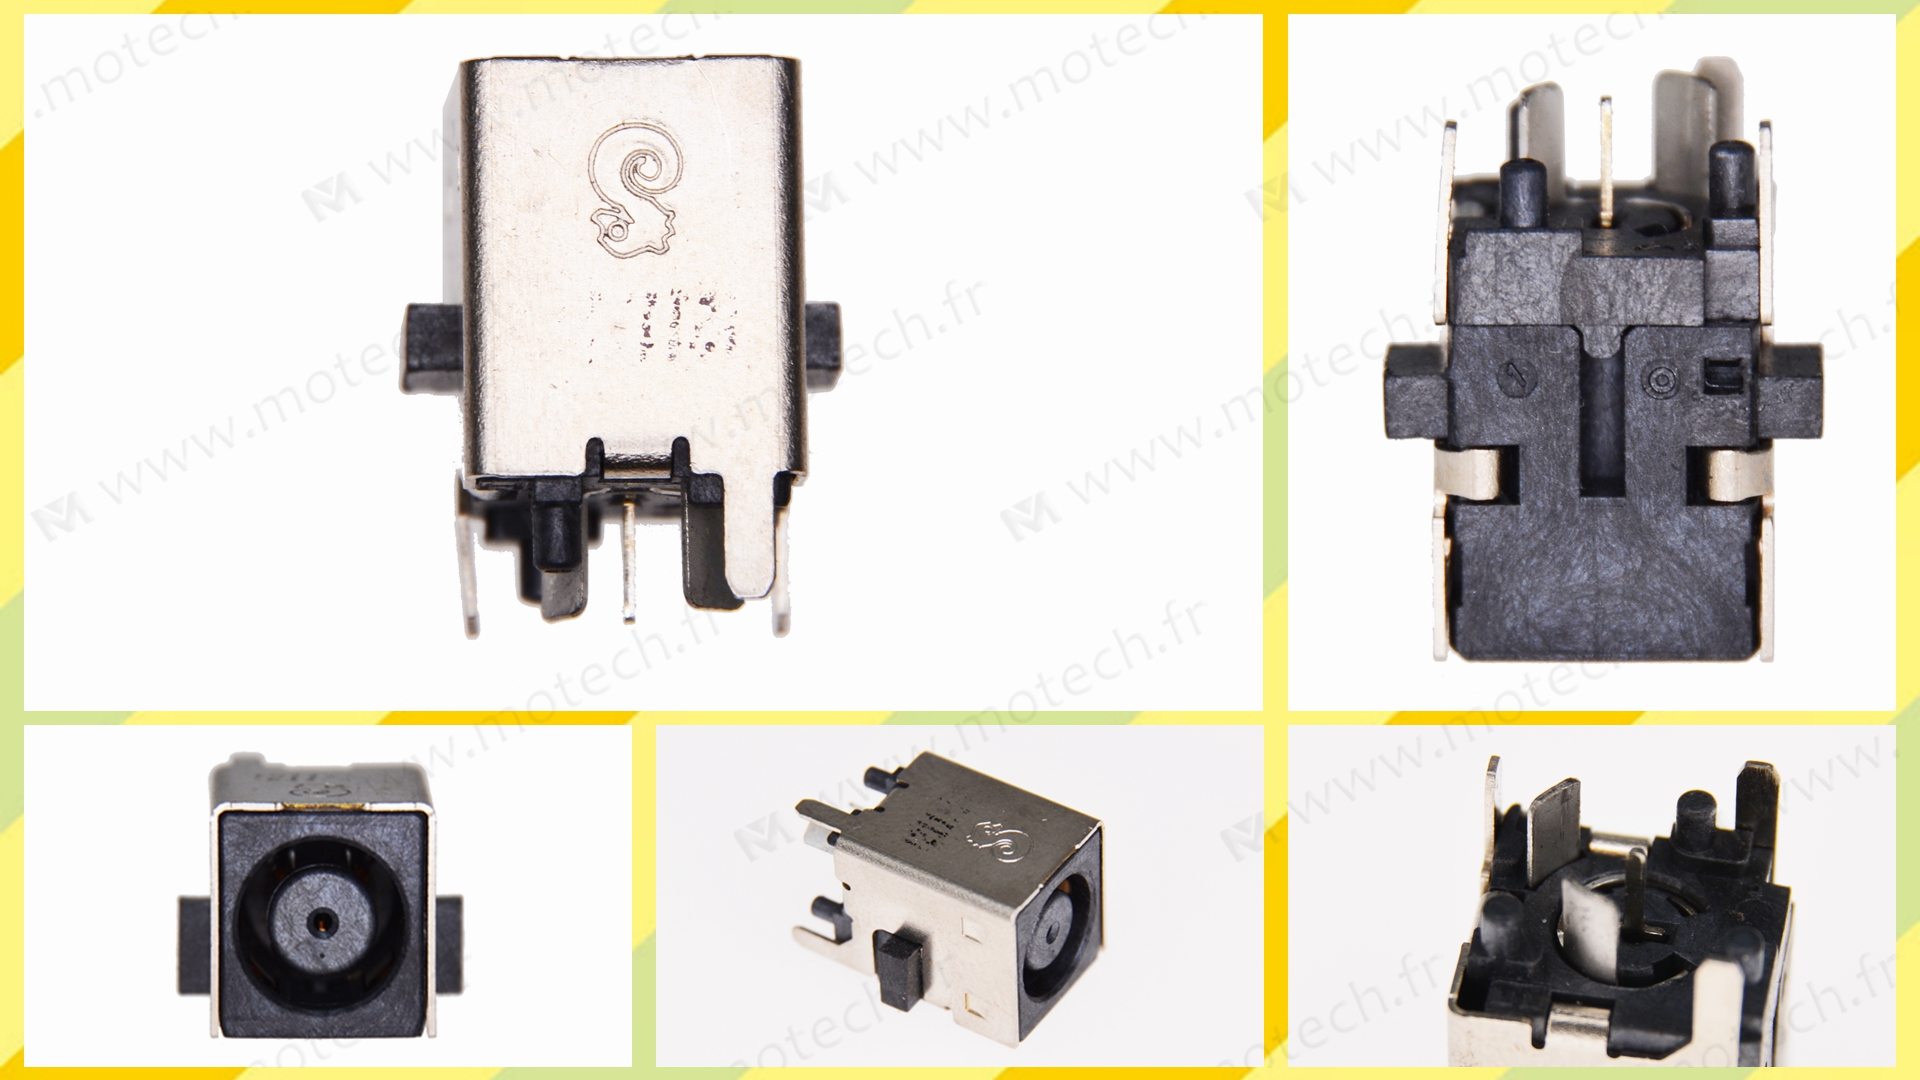 HP 23-B charging connector, HP 23-B DC Power Jack, HP 23-B Power Jack, HP 23-B plug, HP 23-B Jack socket, HP 23-B connecteur de charge, 